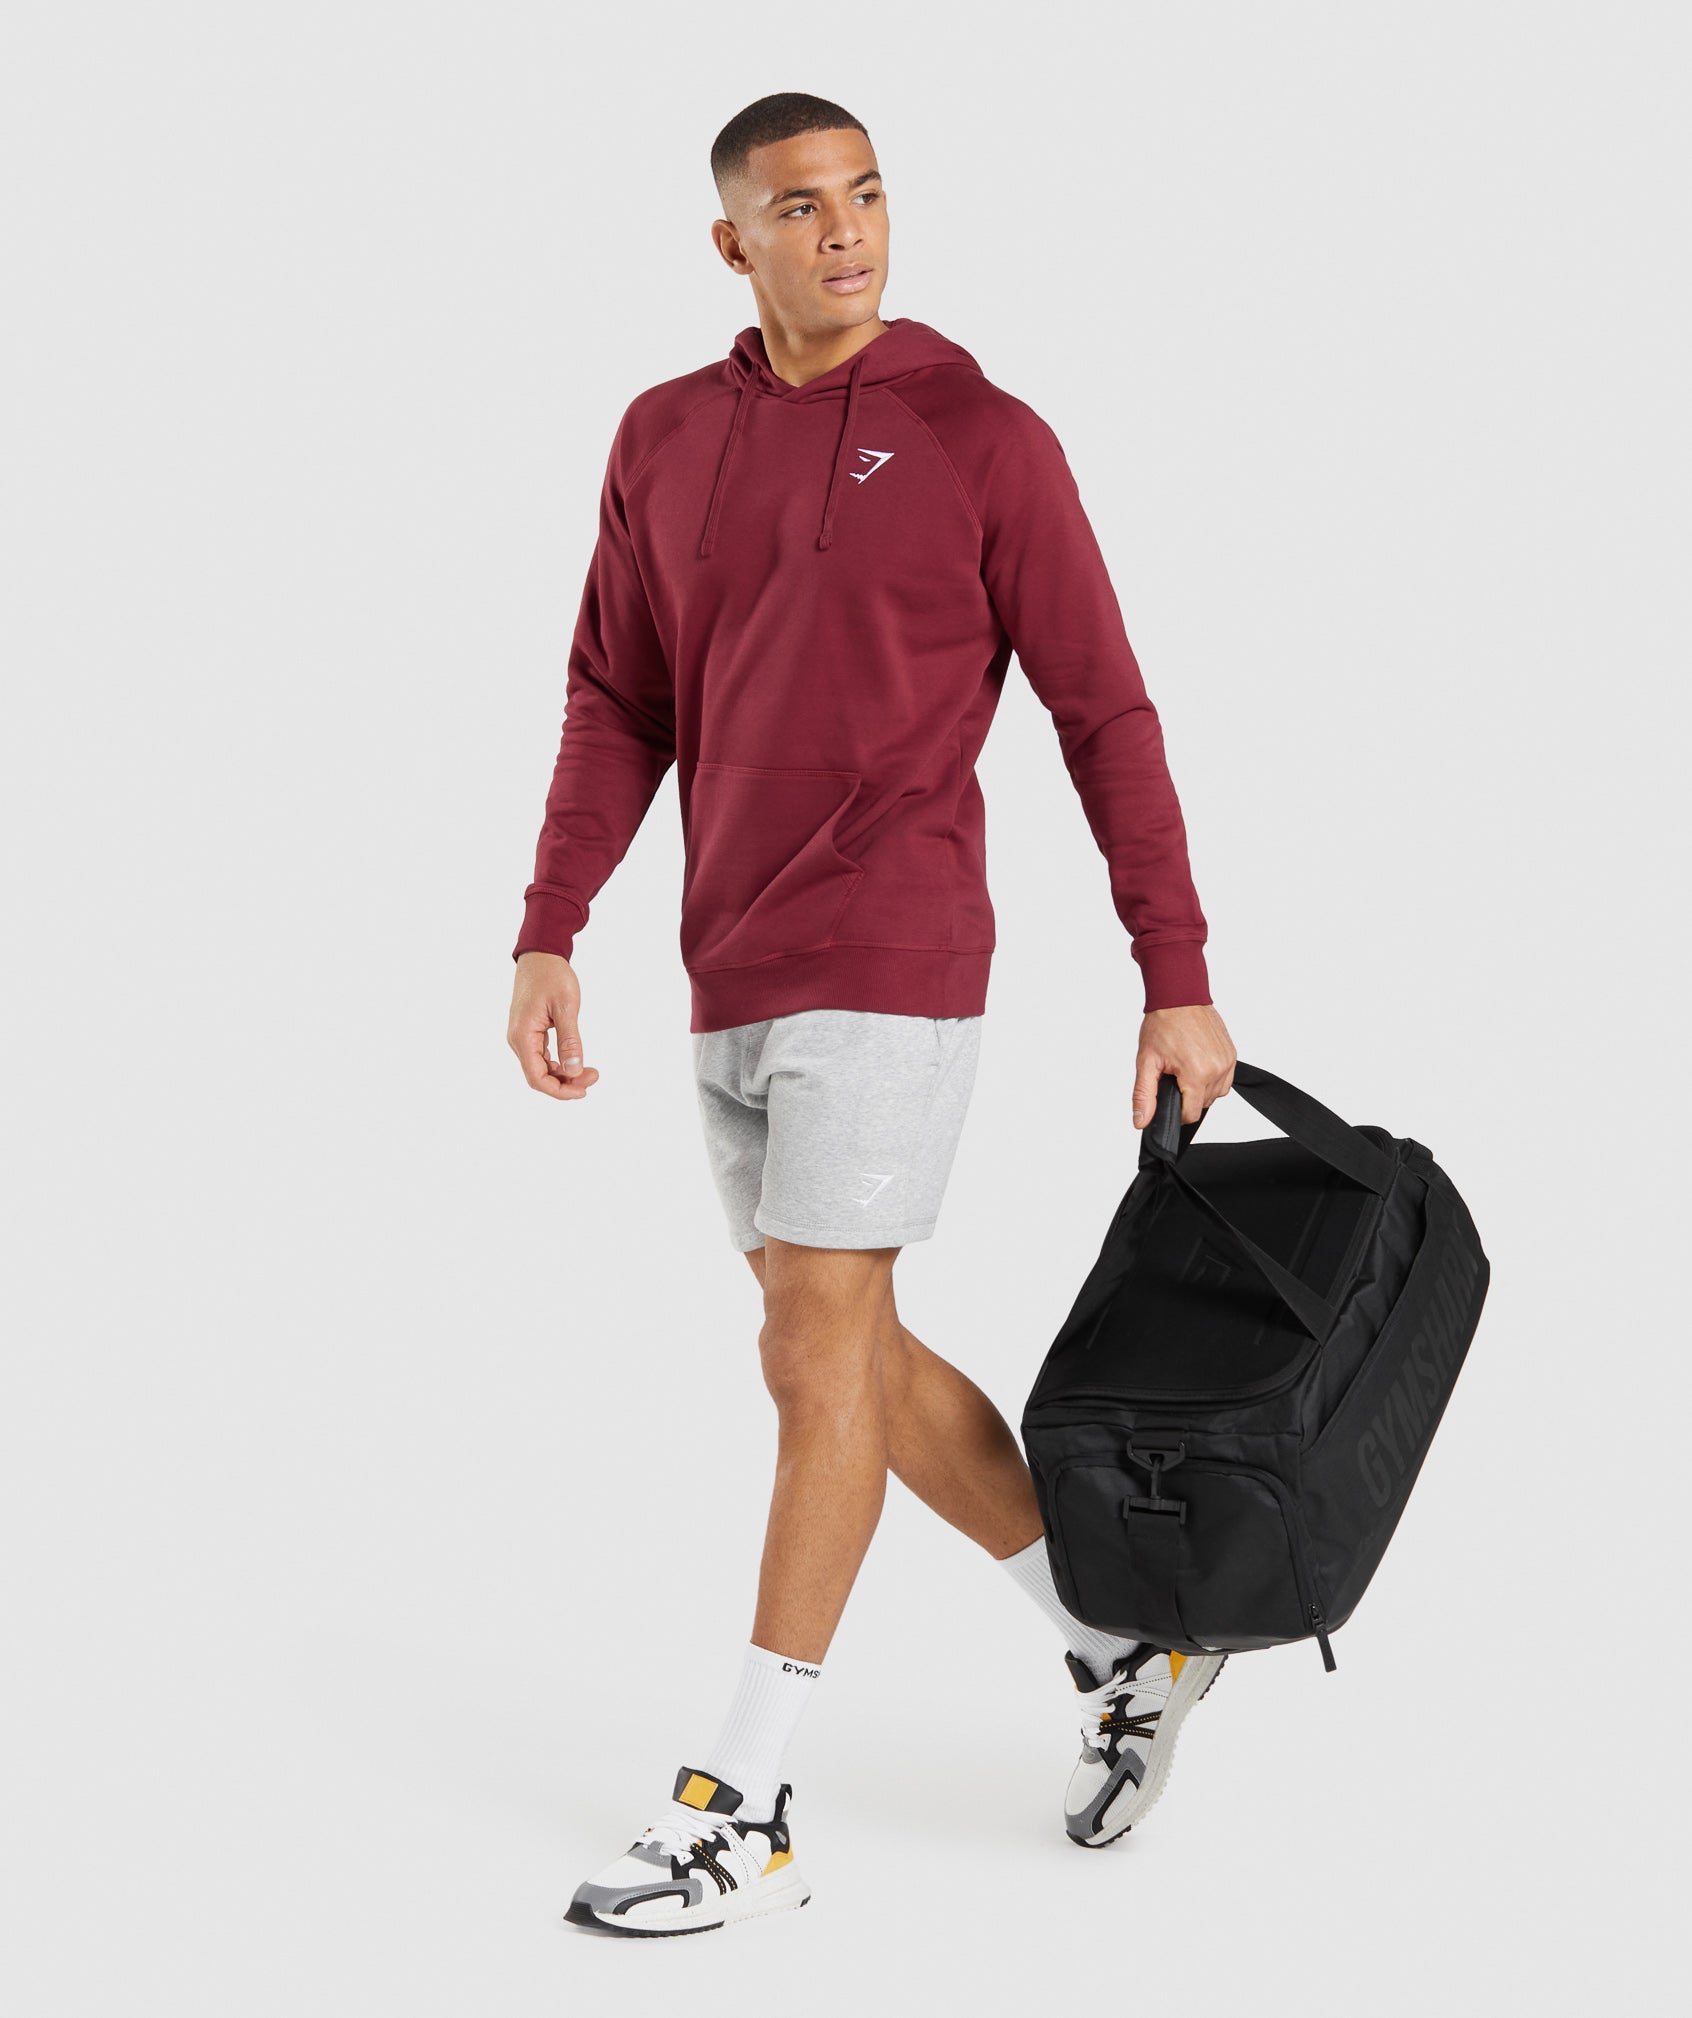 Crest Hoodie in Burgundy Red - view 5